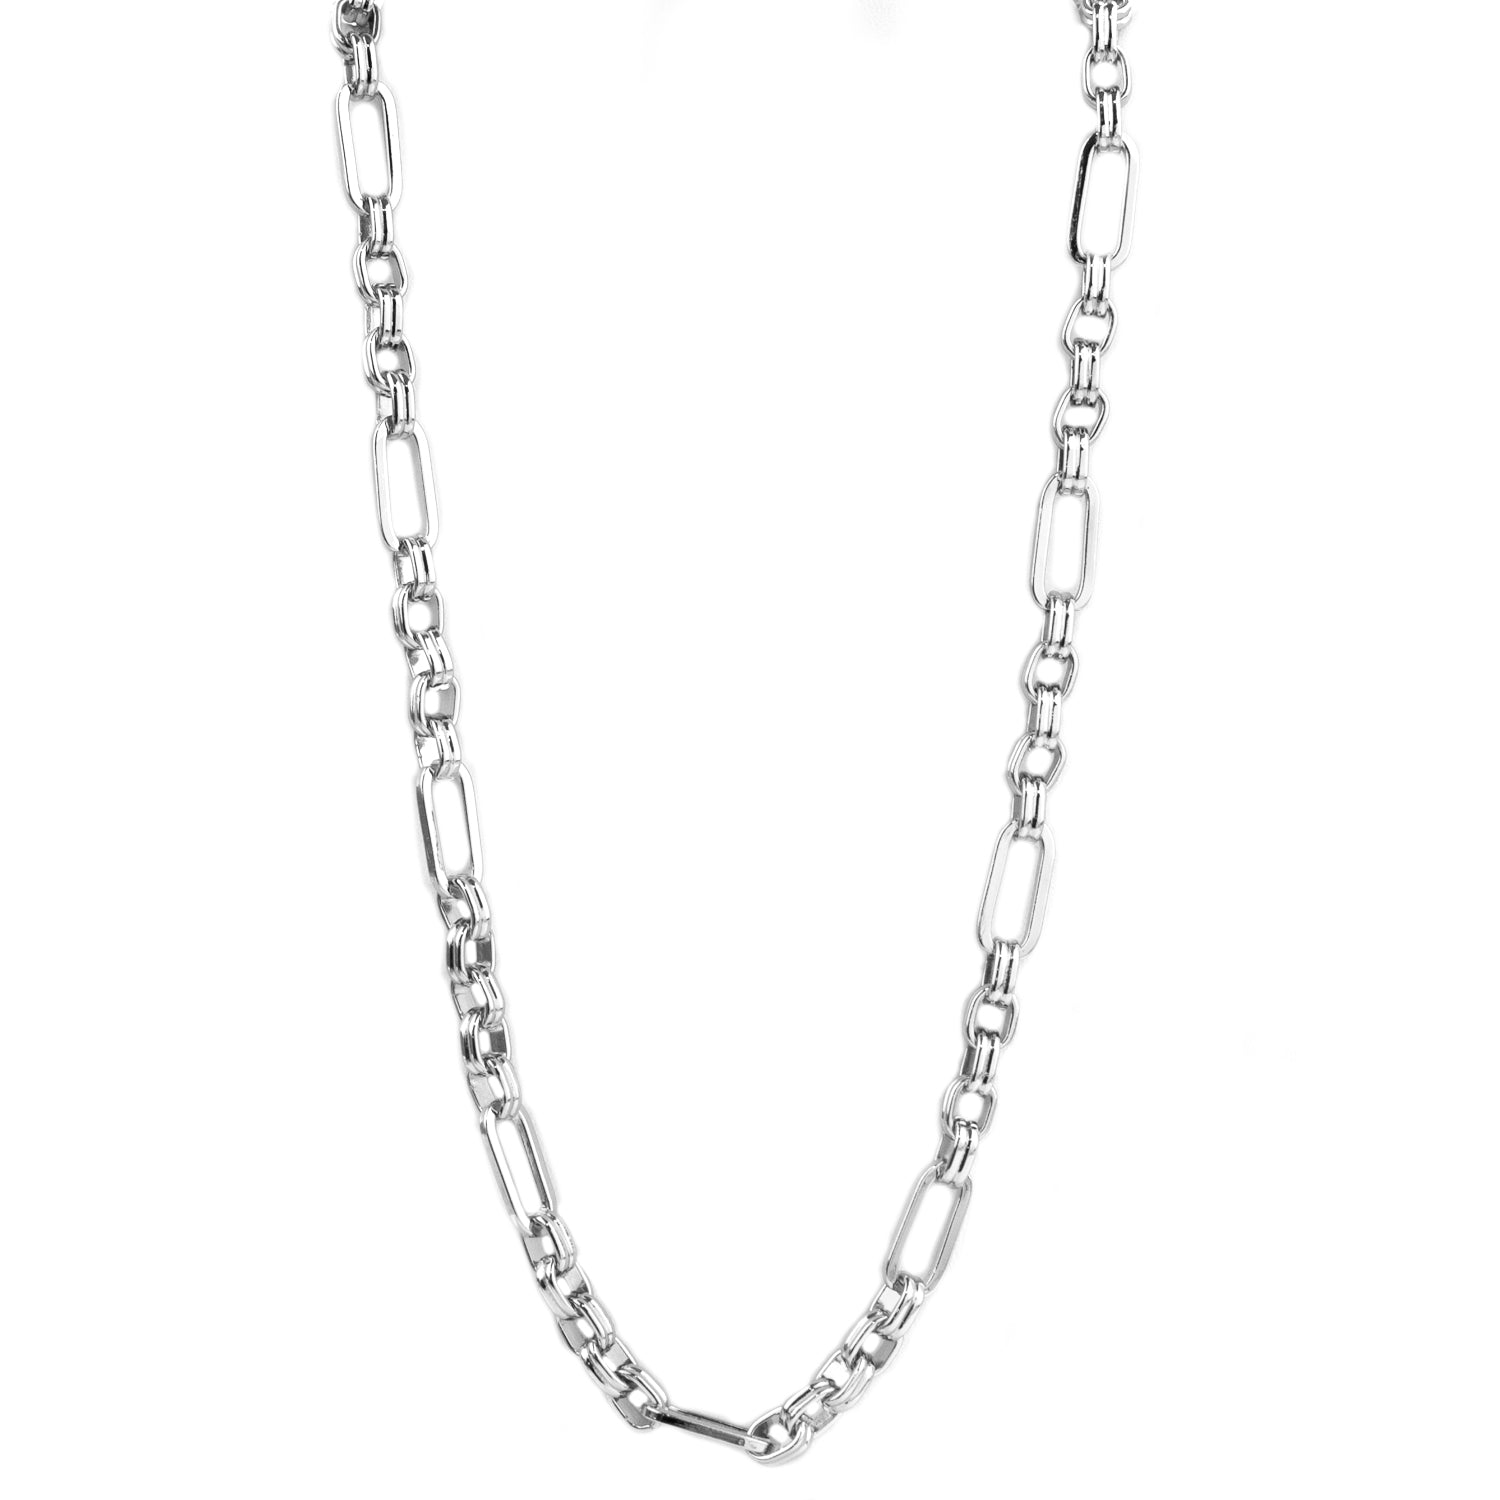 24" cable & oval link necklace